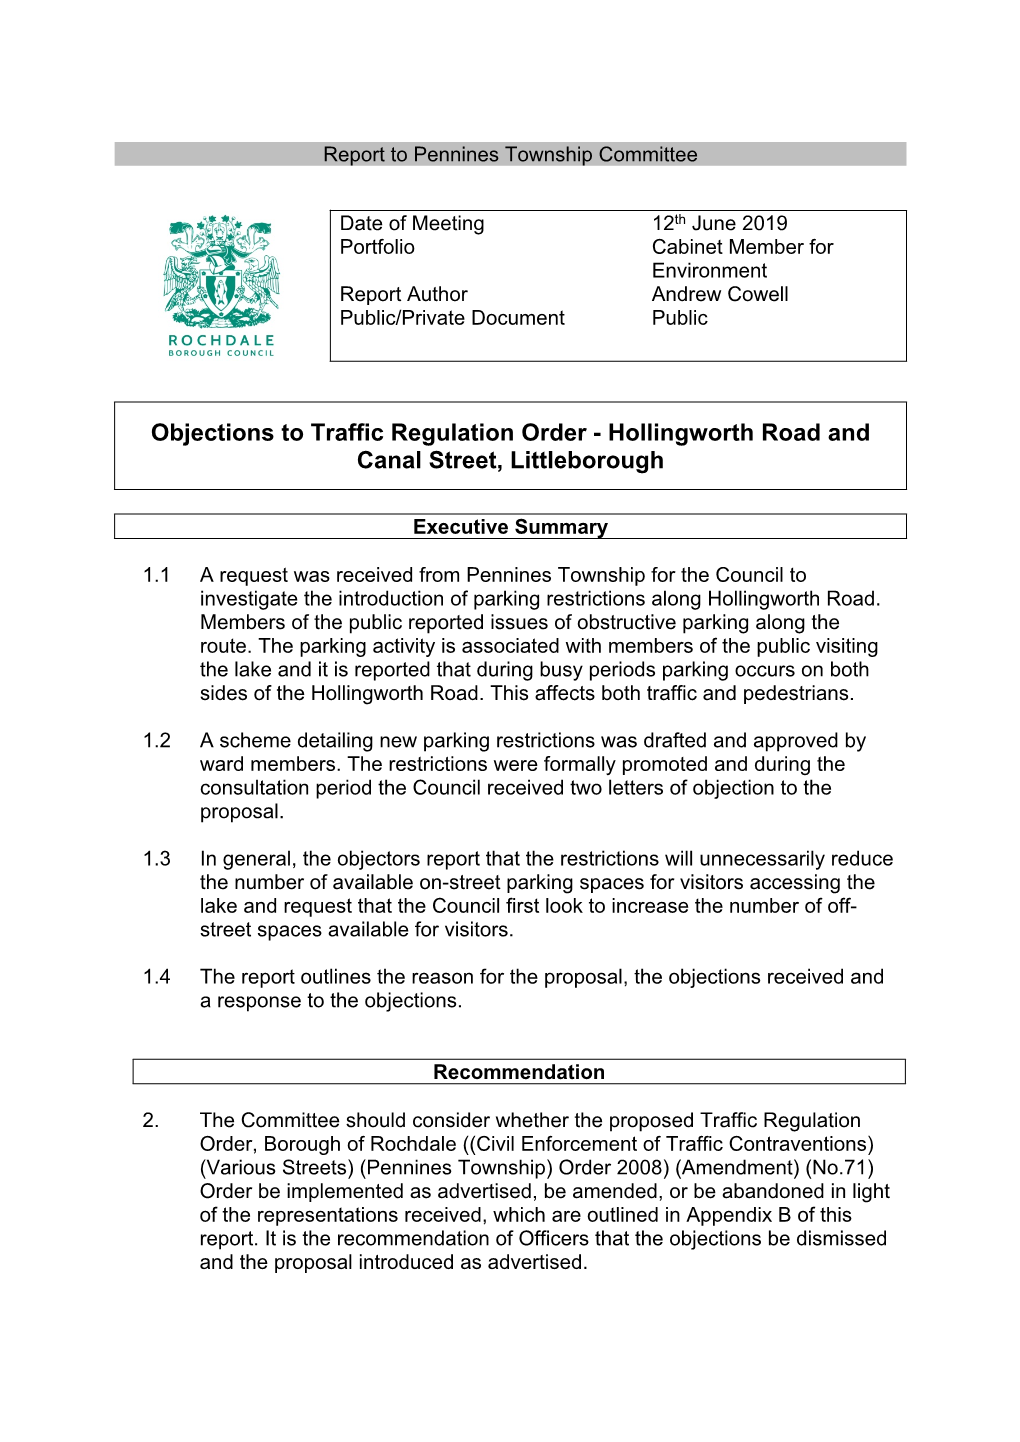 Objections to Traffic Regulation Order - Hollingworth Road and Canal Street, Littleborough